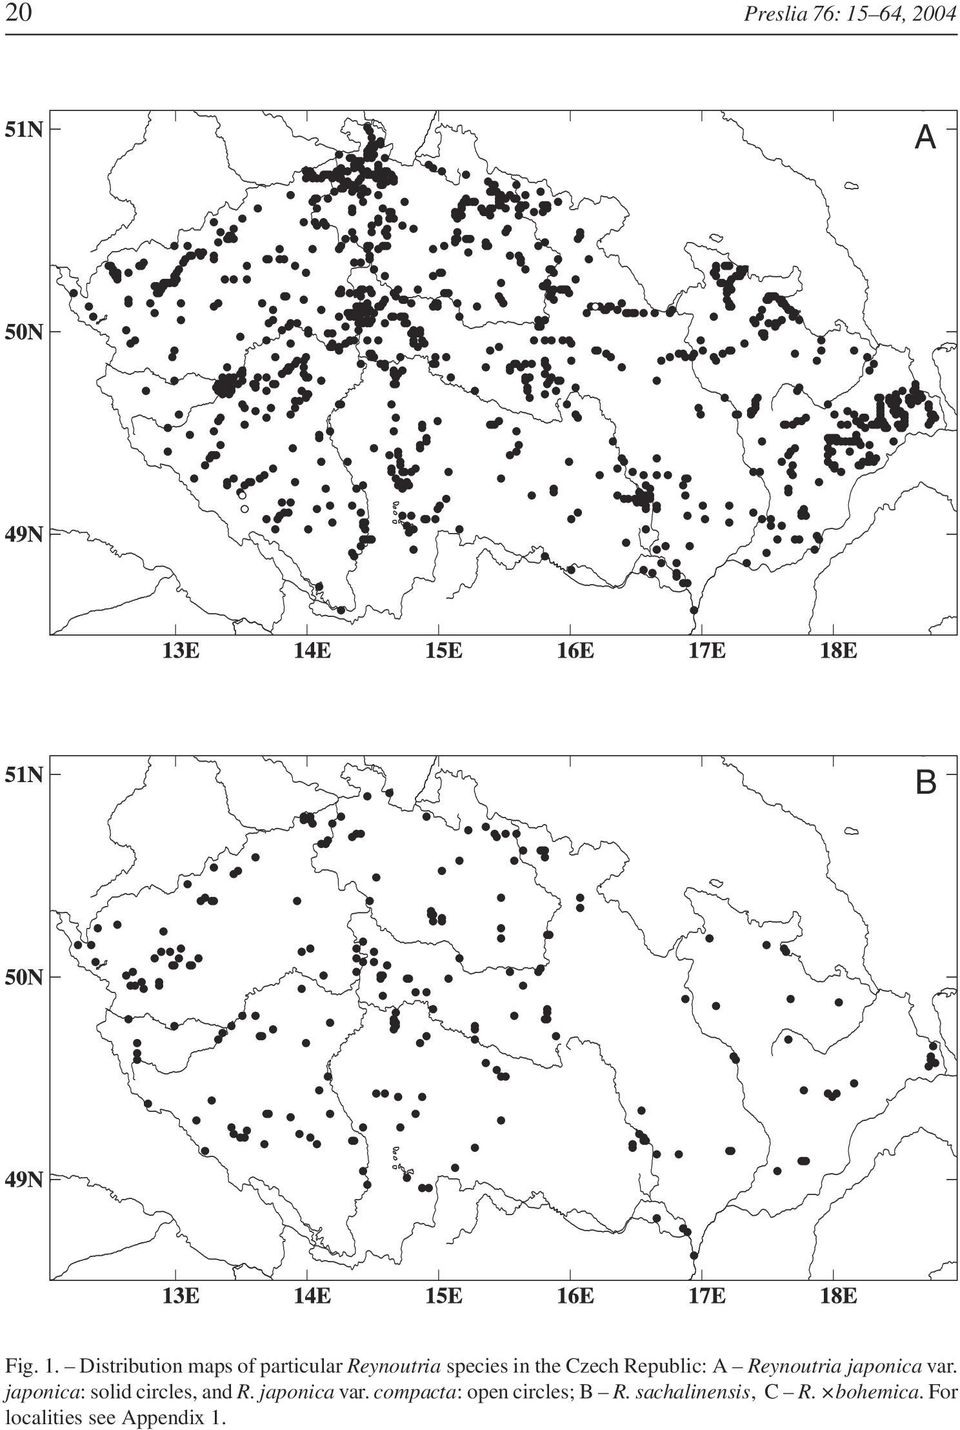 Distribution maps of particular Reynoutria species in the Czech